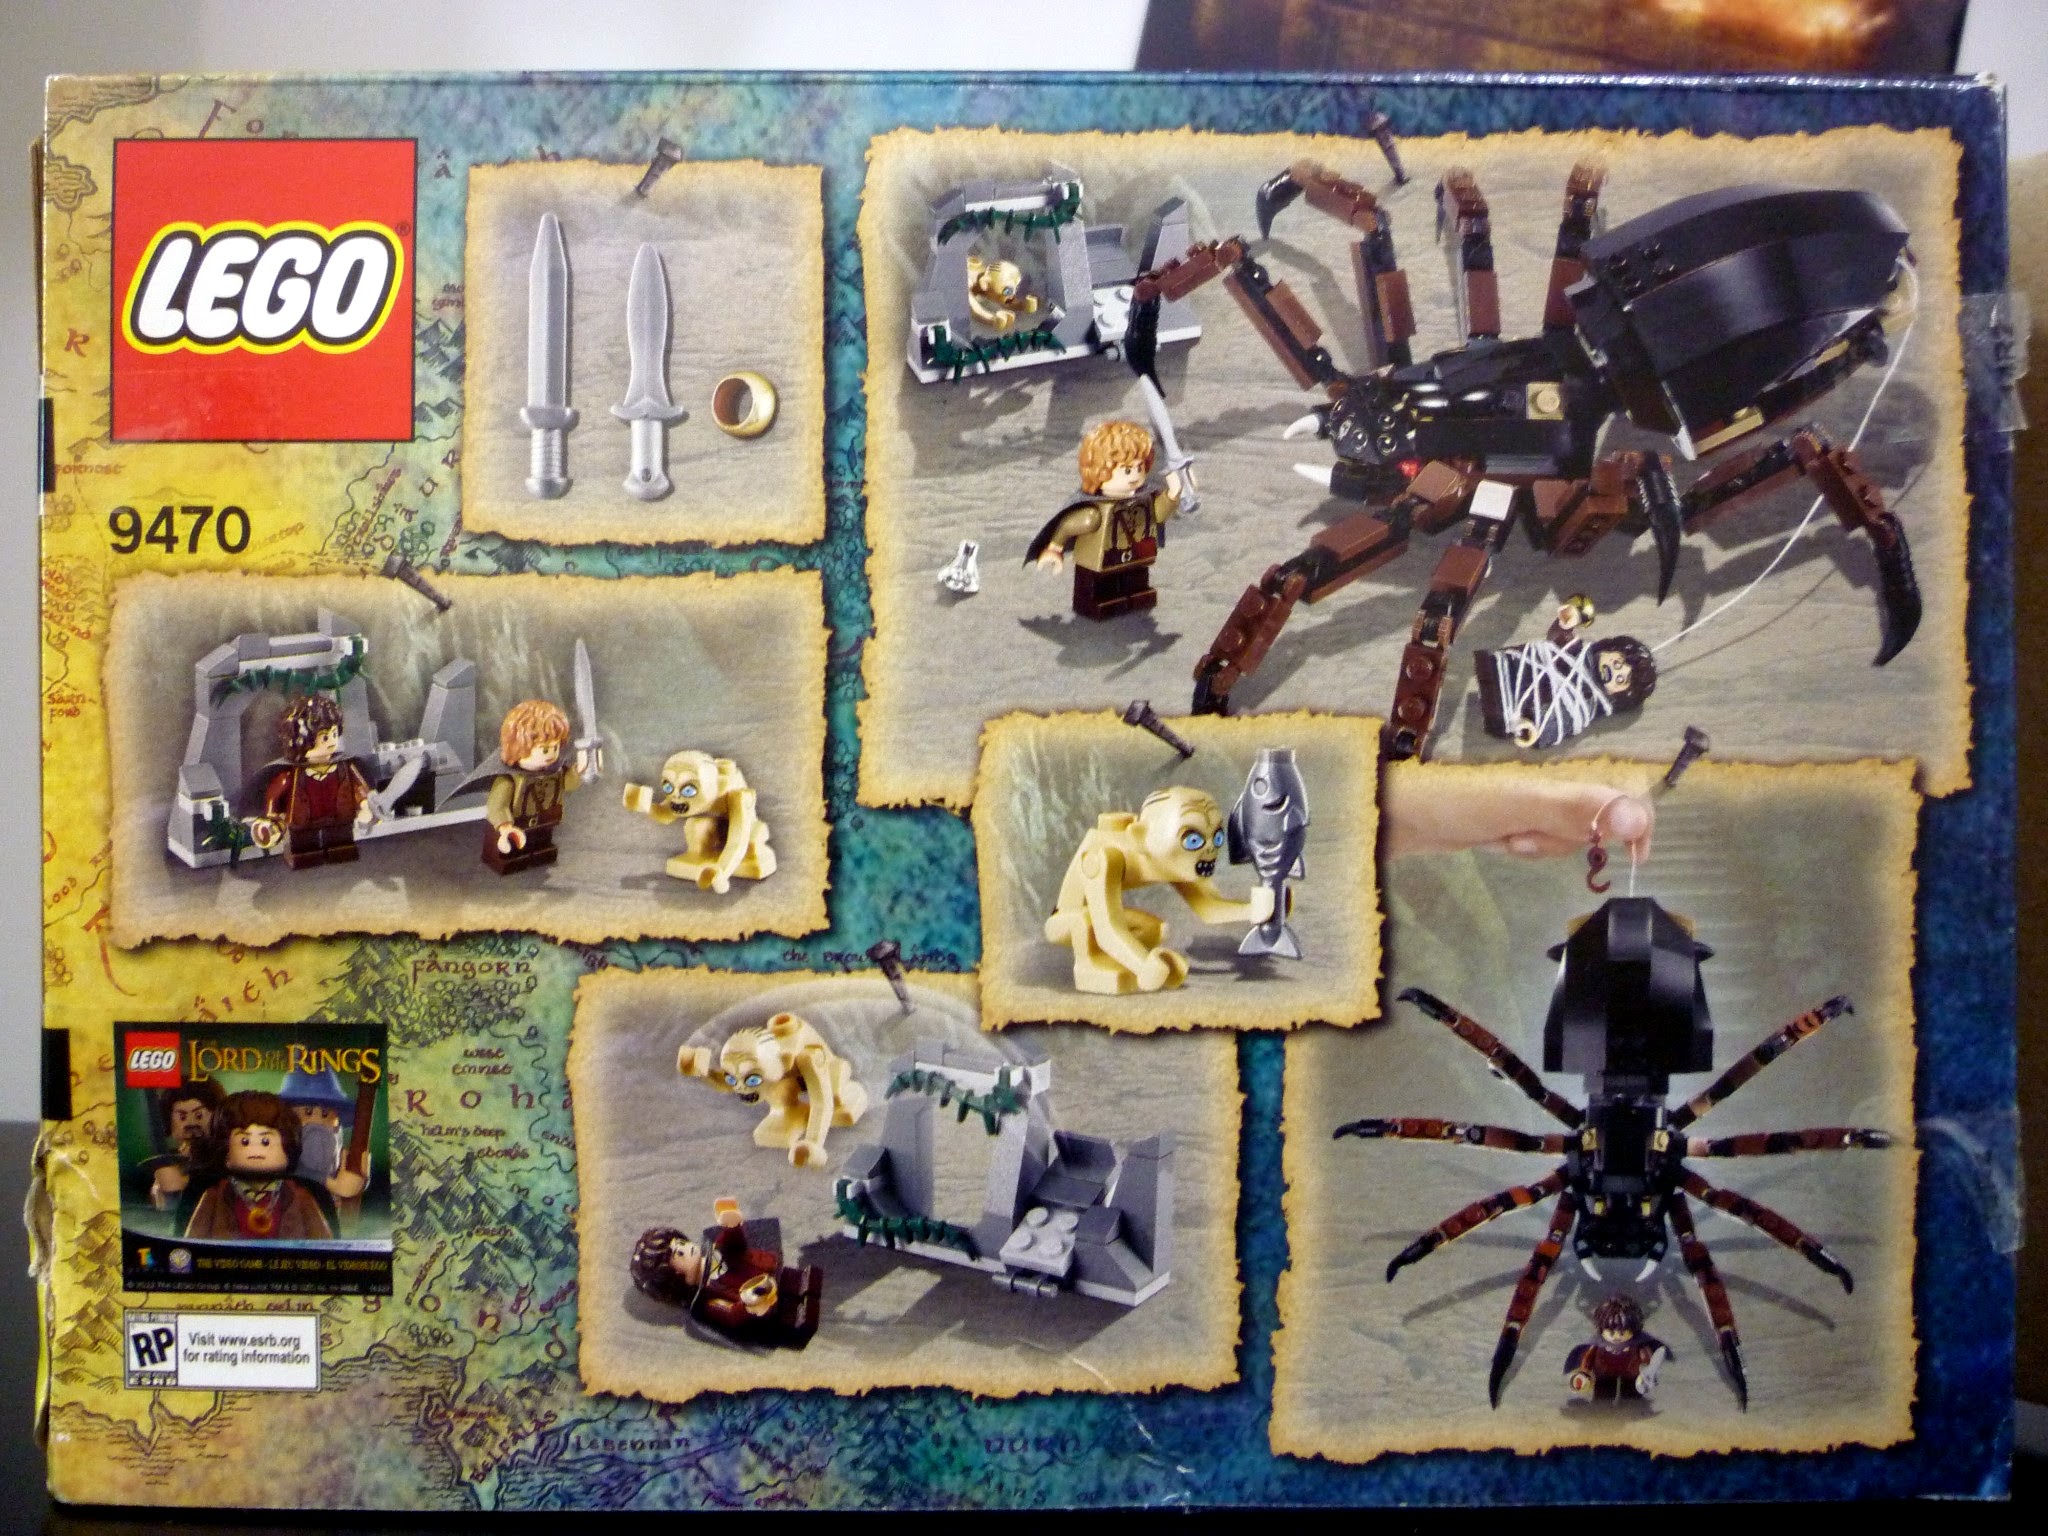 LEGO 9470 Shelob Attacks The Lord of the Rings NO MINI FIGURES / BOX 